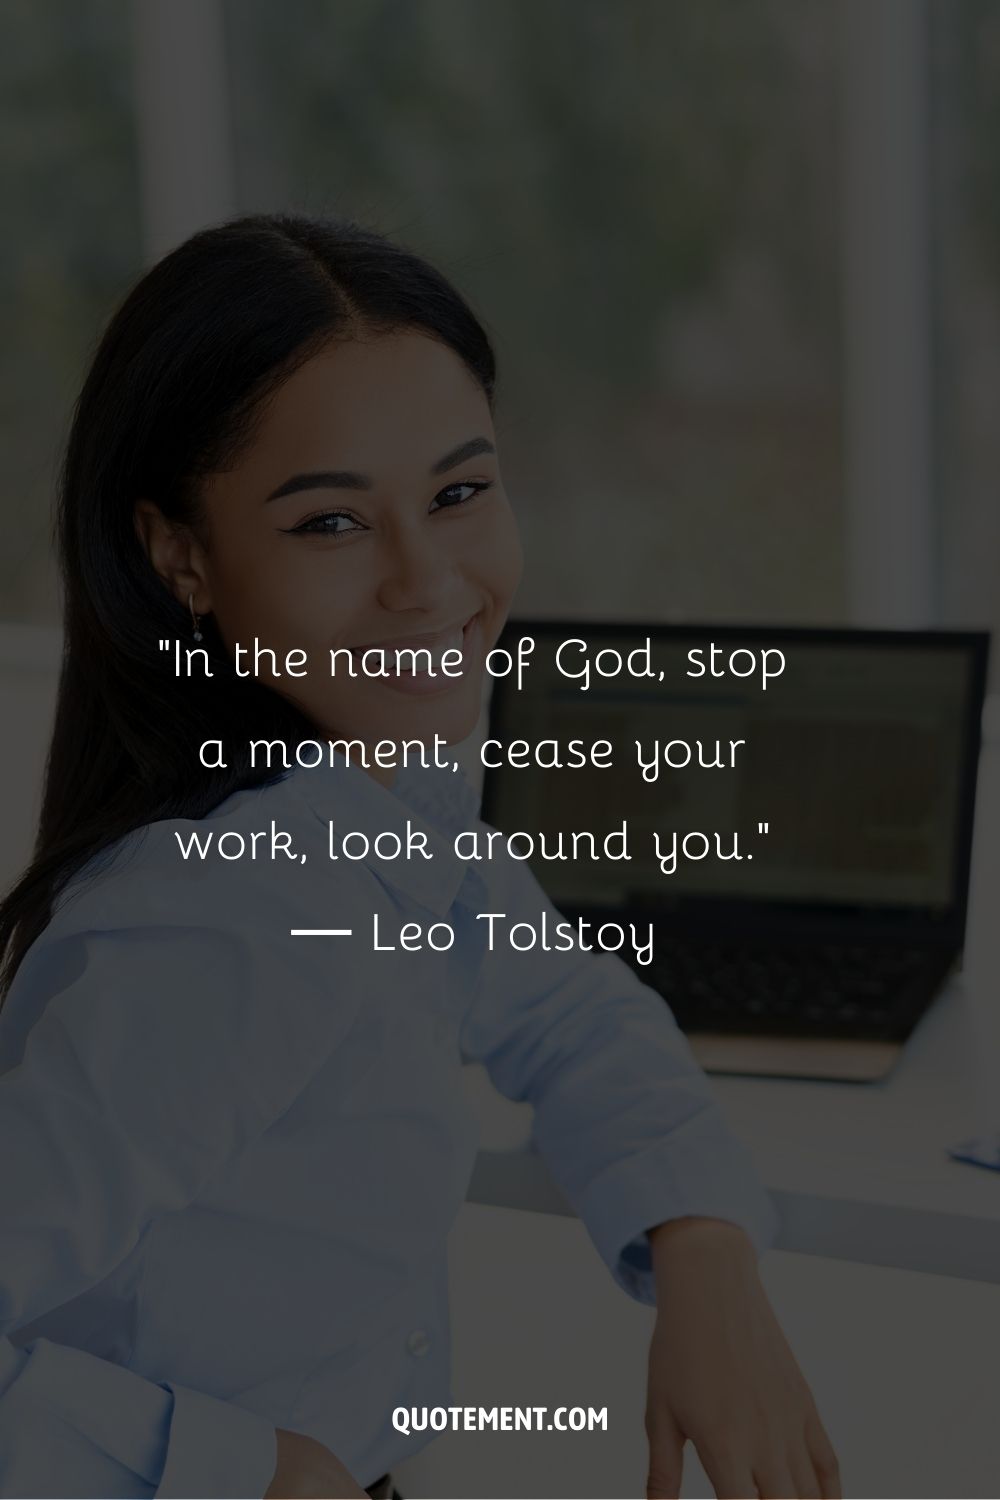 “In the name of God, stop a moment, cease your work, look around you.” ― Leo Tolstoy